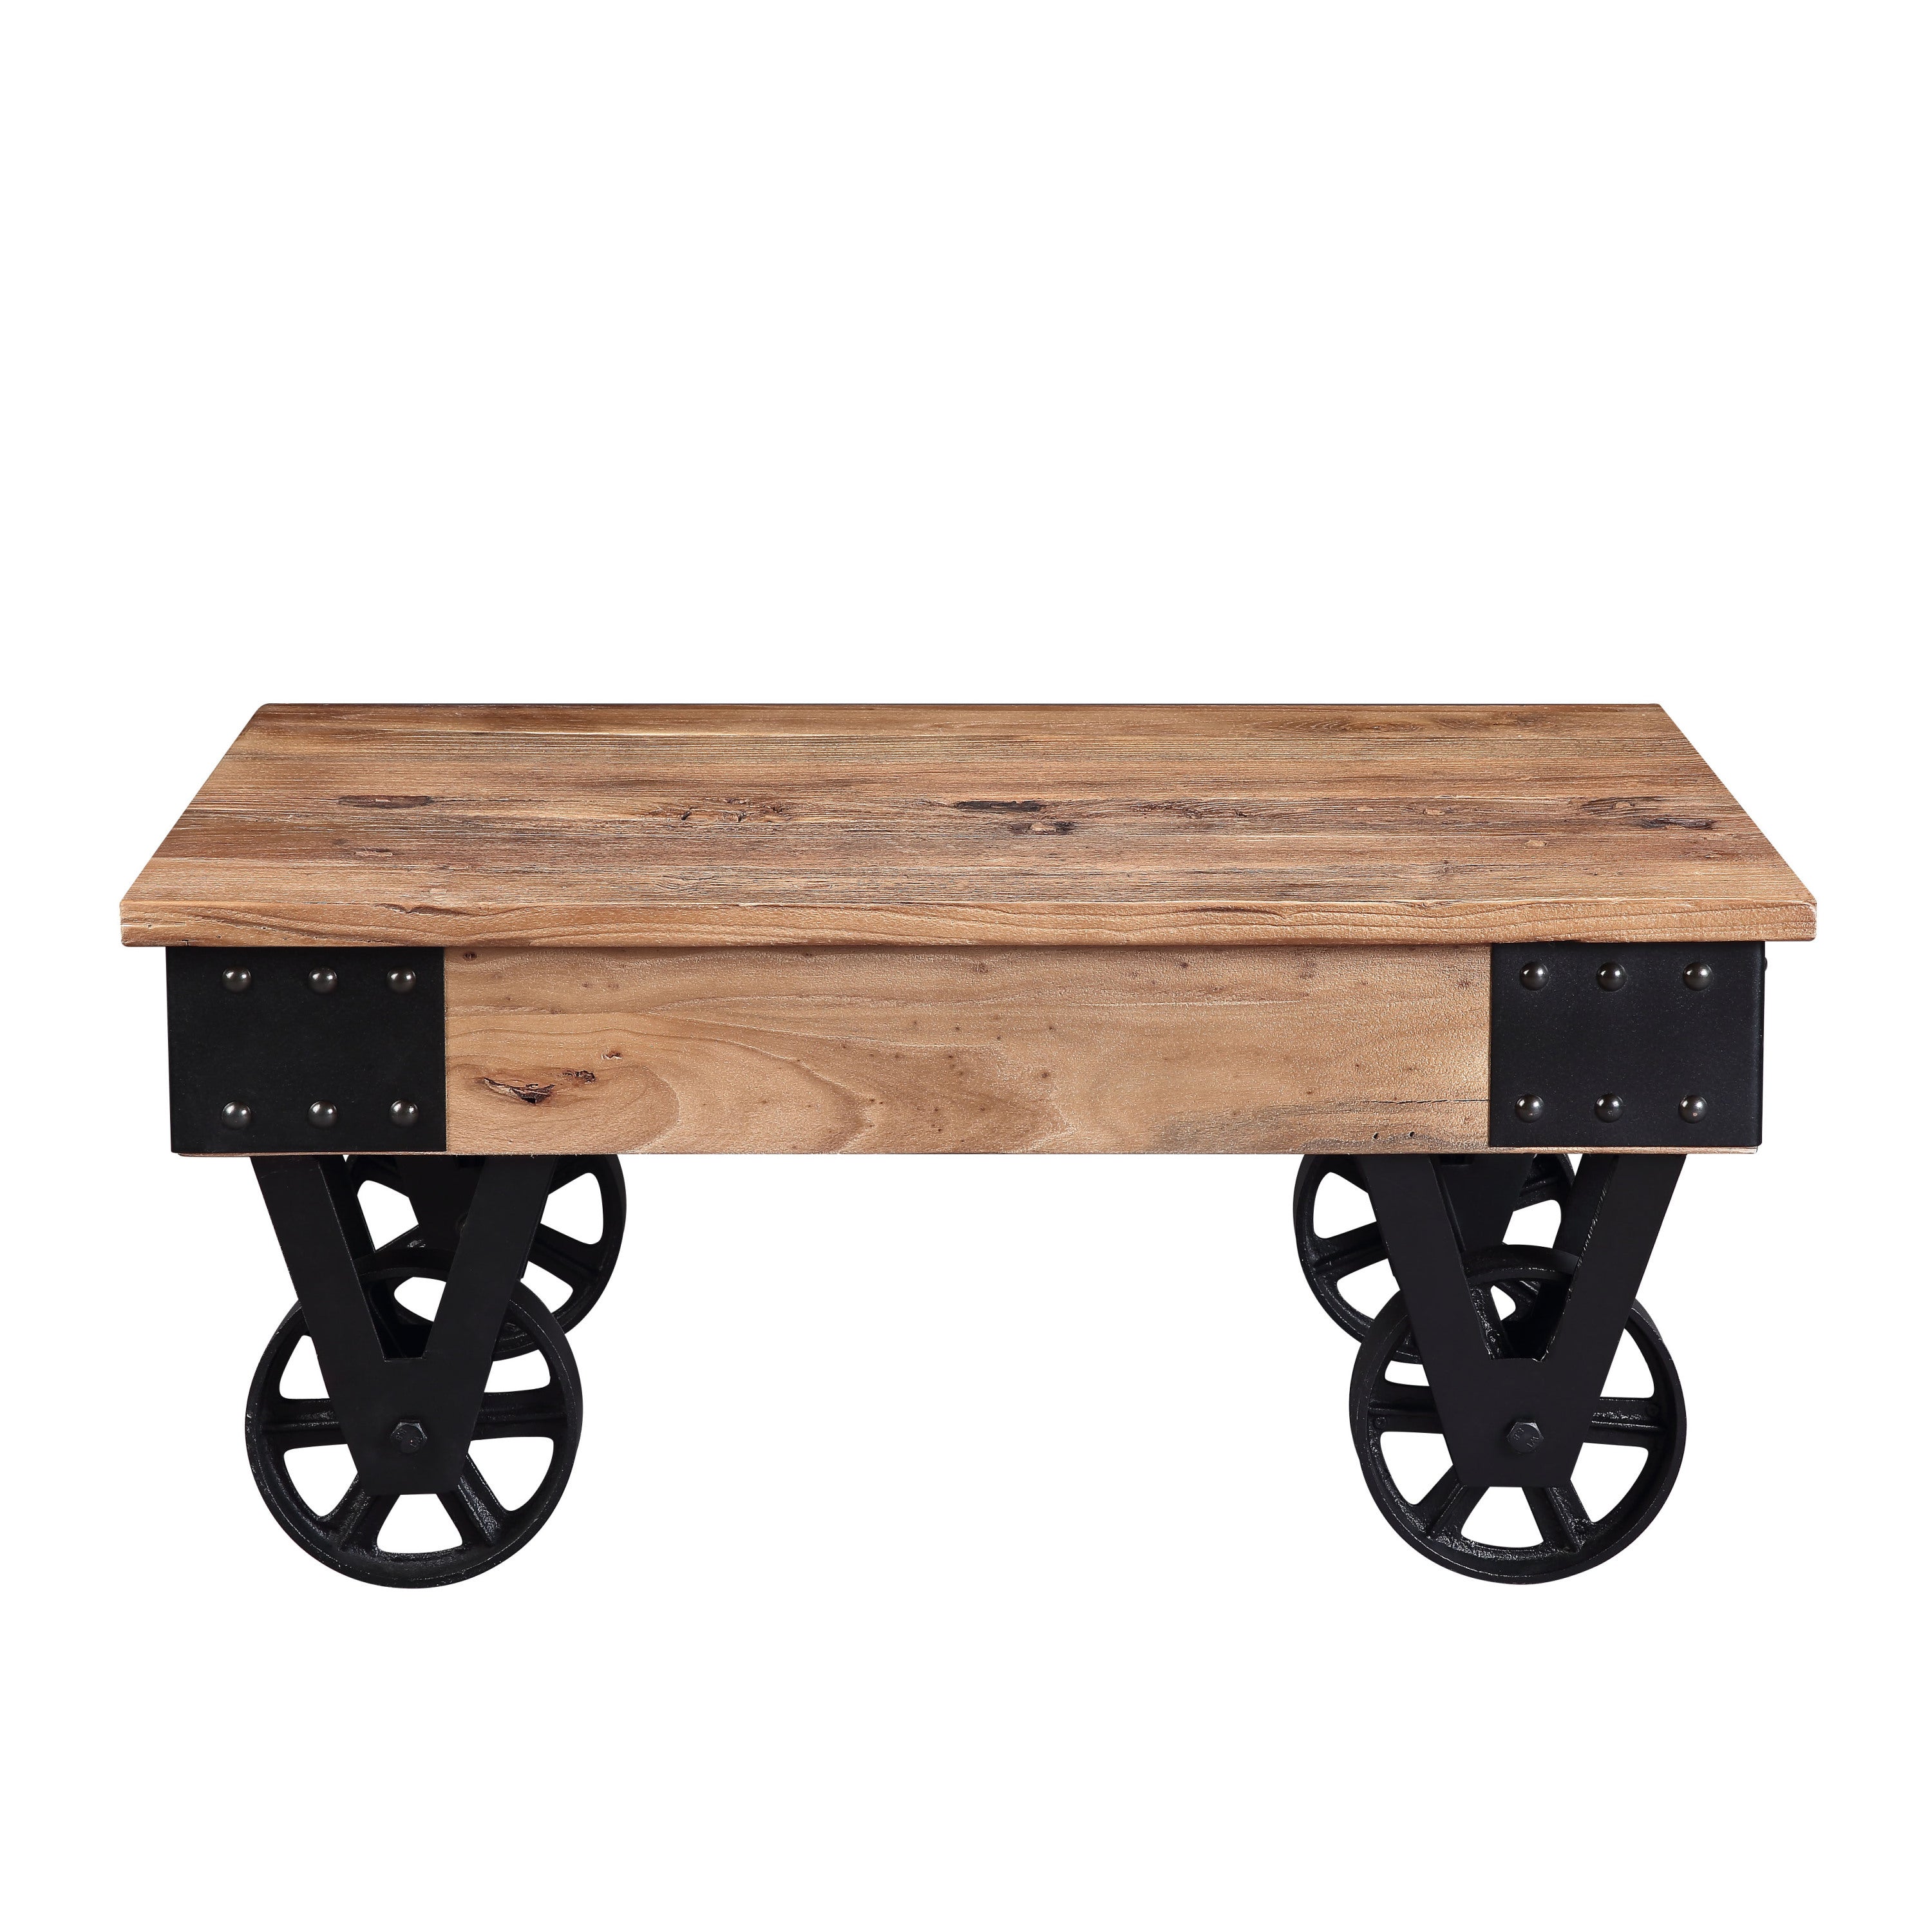 U_STYLE Distressed Coffee Table Recycle elm with Wheels, natural wood